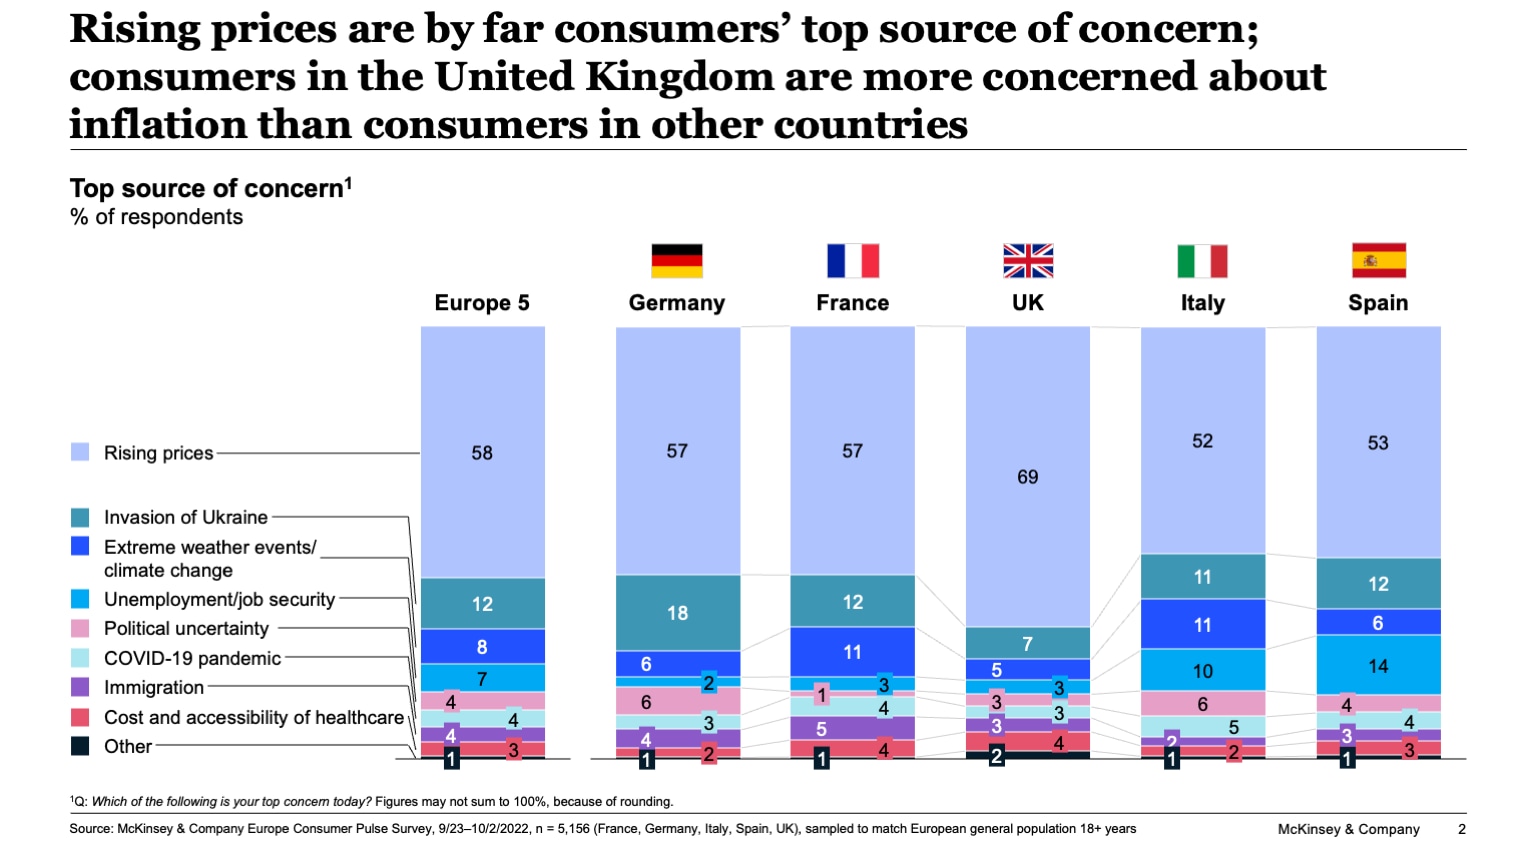 Rising prices are by far consumers' top source of concern; consumers in the United Kingdom are more concerned about inflation than consumers in other countries